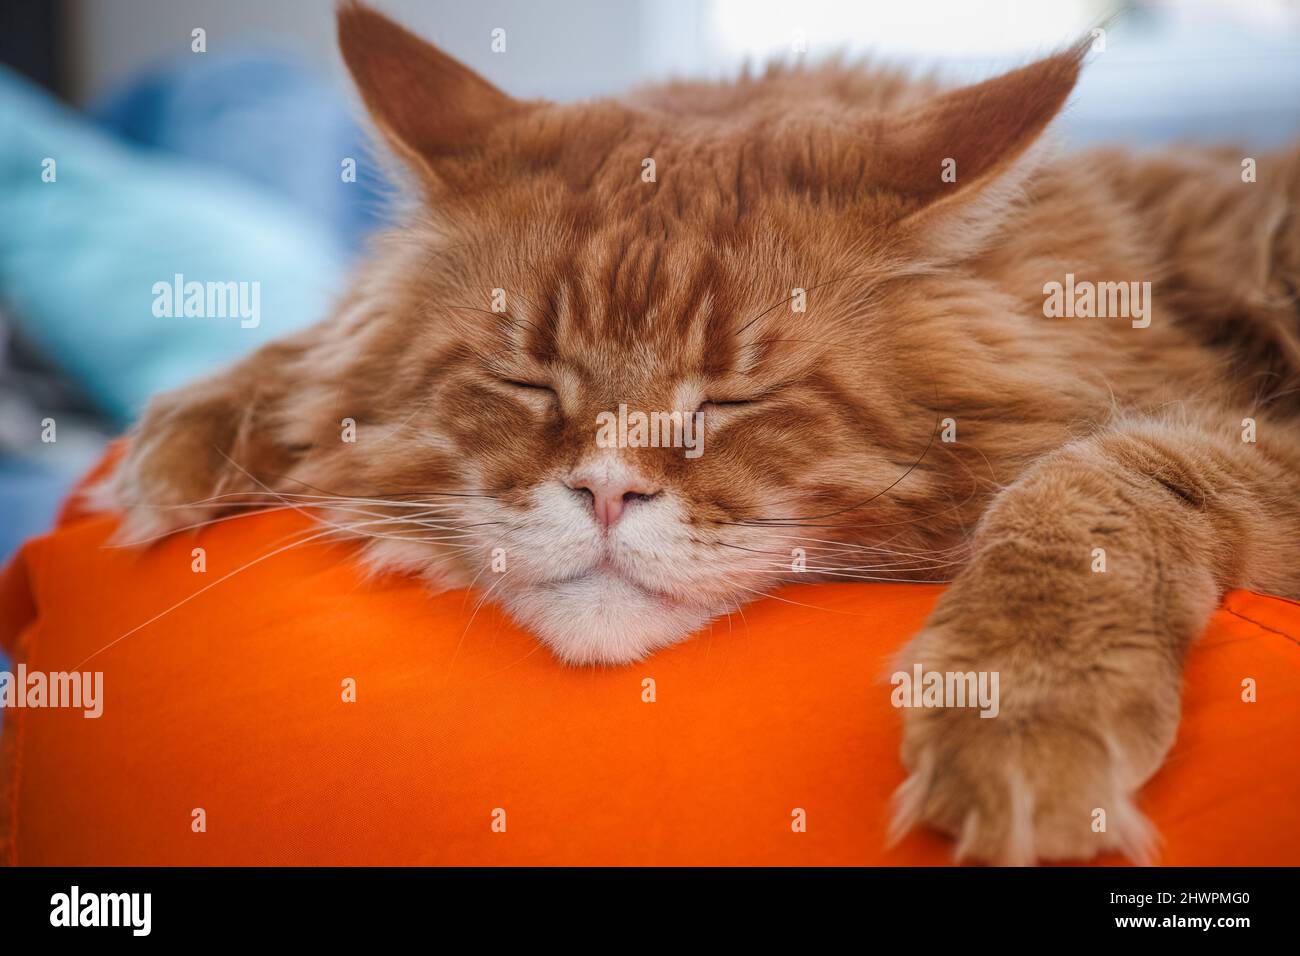 A red Maine coon cat sleeping on an orange bean bag chair. Close up. Stock Photo